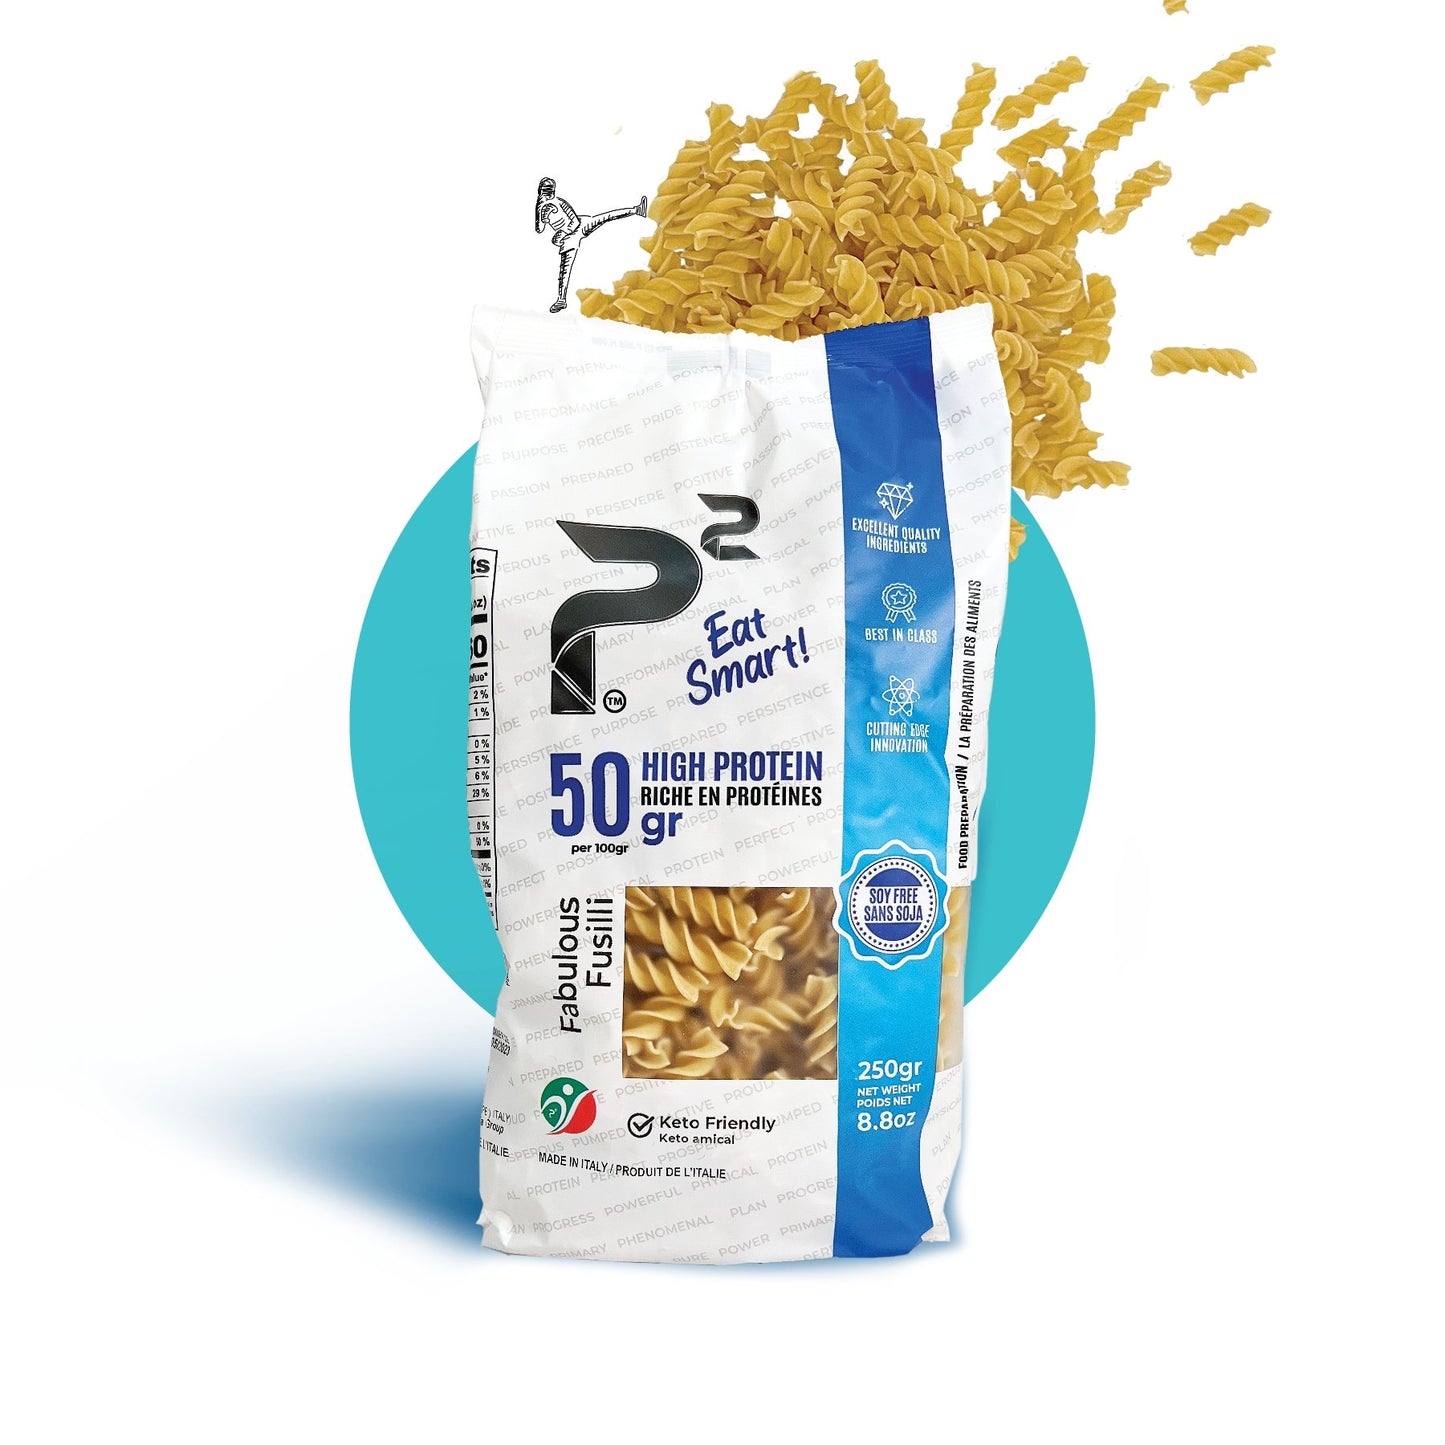 Fabulous Fusilli pasta. High protein, fibre rich, and low carb. Italian pasta. 50g protein and 14g net carbs per 100g. No added sugar, Soy free, Diabetic friendly, Low glycemic index.